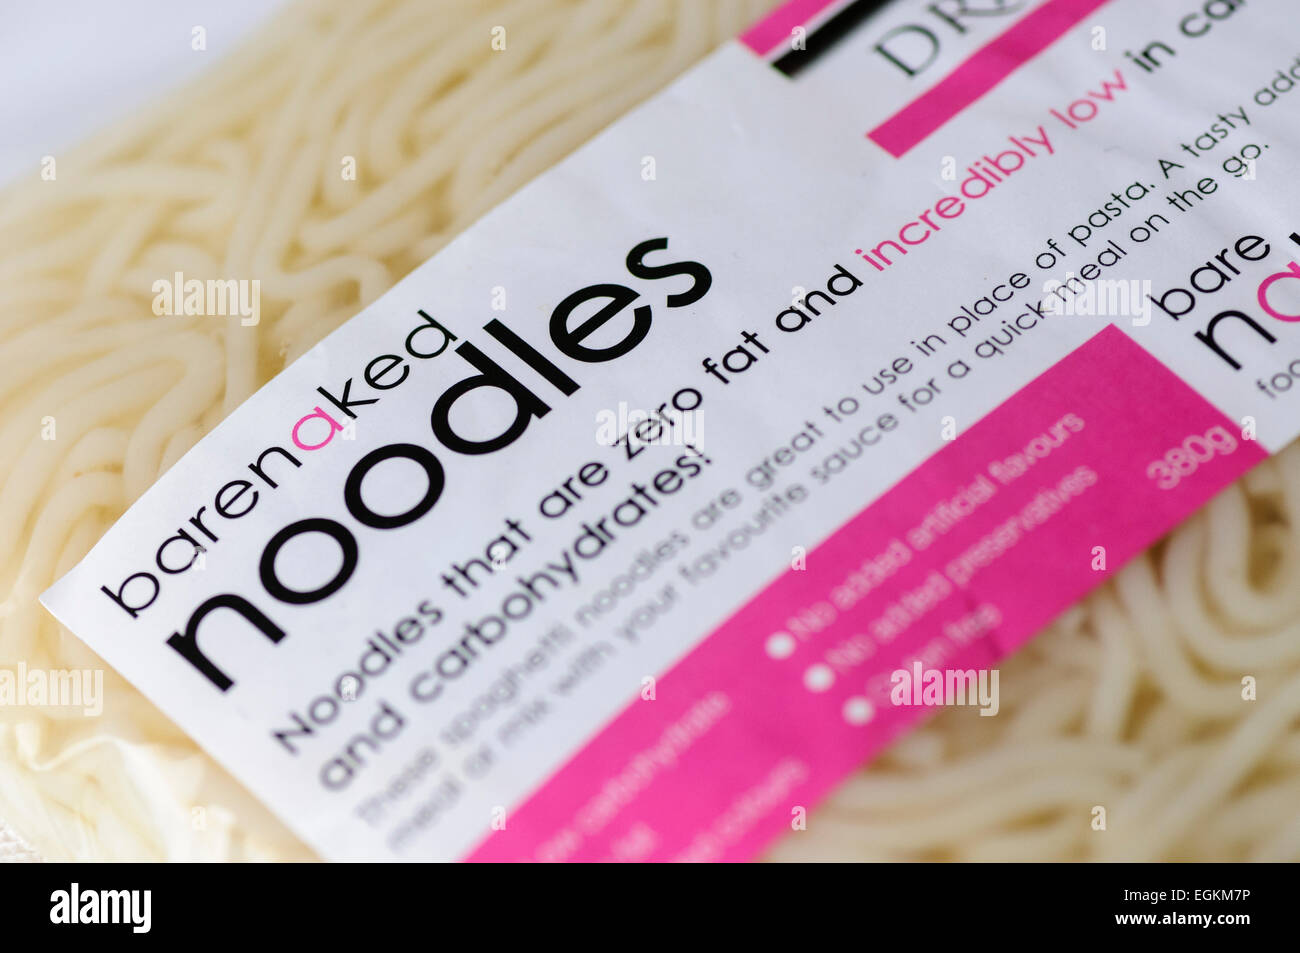 Barenaked Noodles, low fat and calorie noodles, as seen on the TV show 'Dragon's Den' Stock Photo